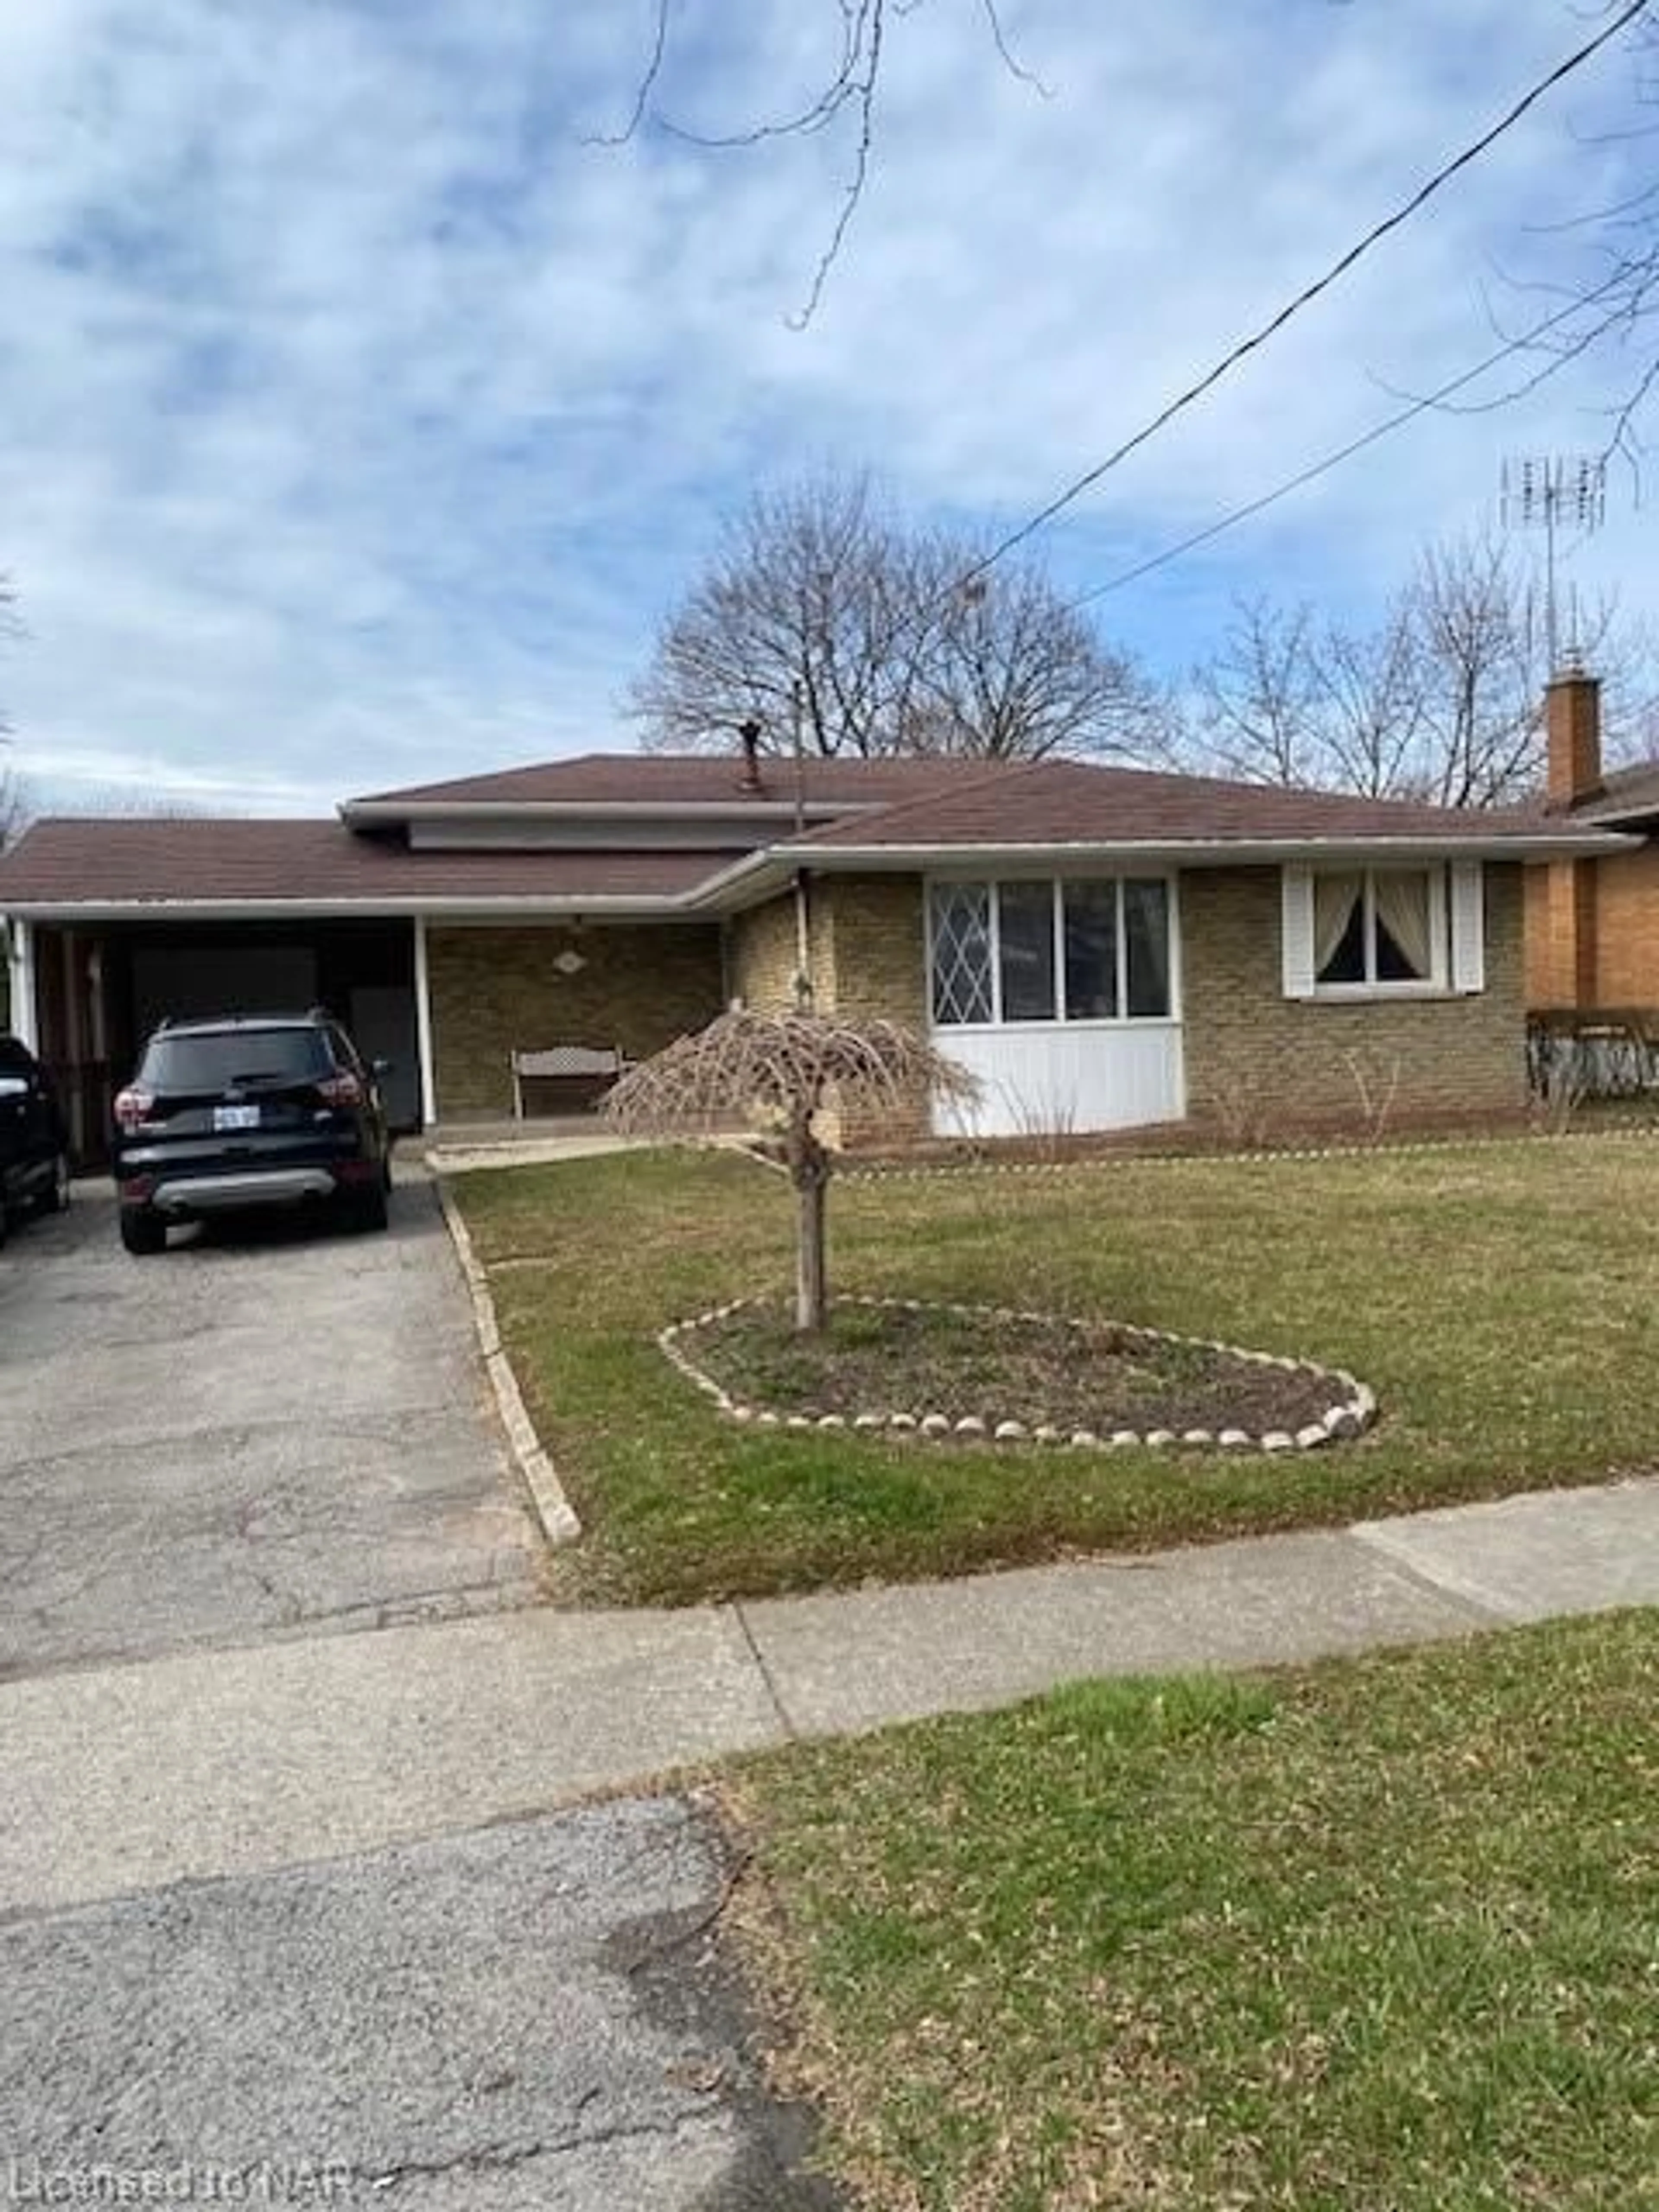 Frontside or backside of a home for 711 Niagara St, St. Catharines Ontario L2M 3S1